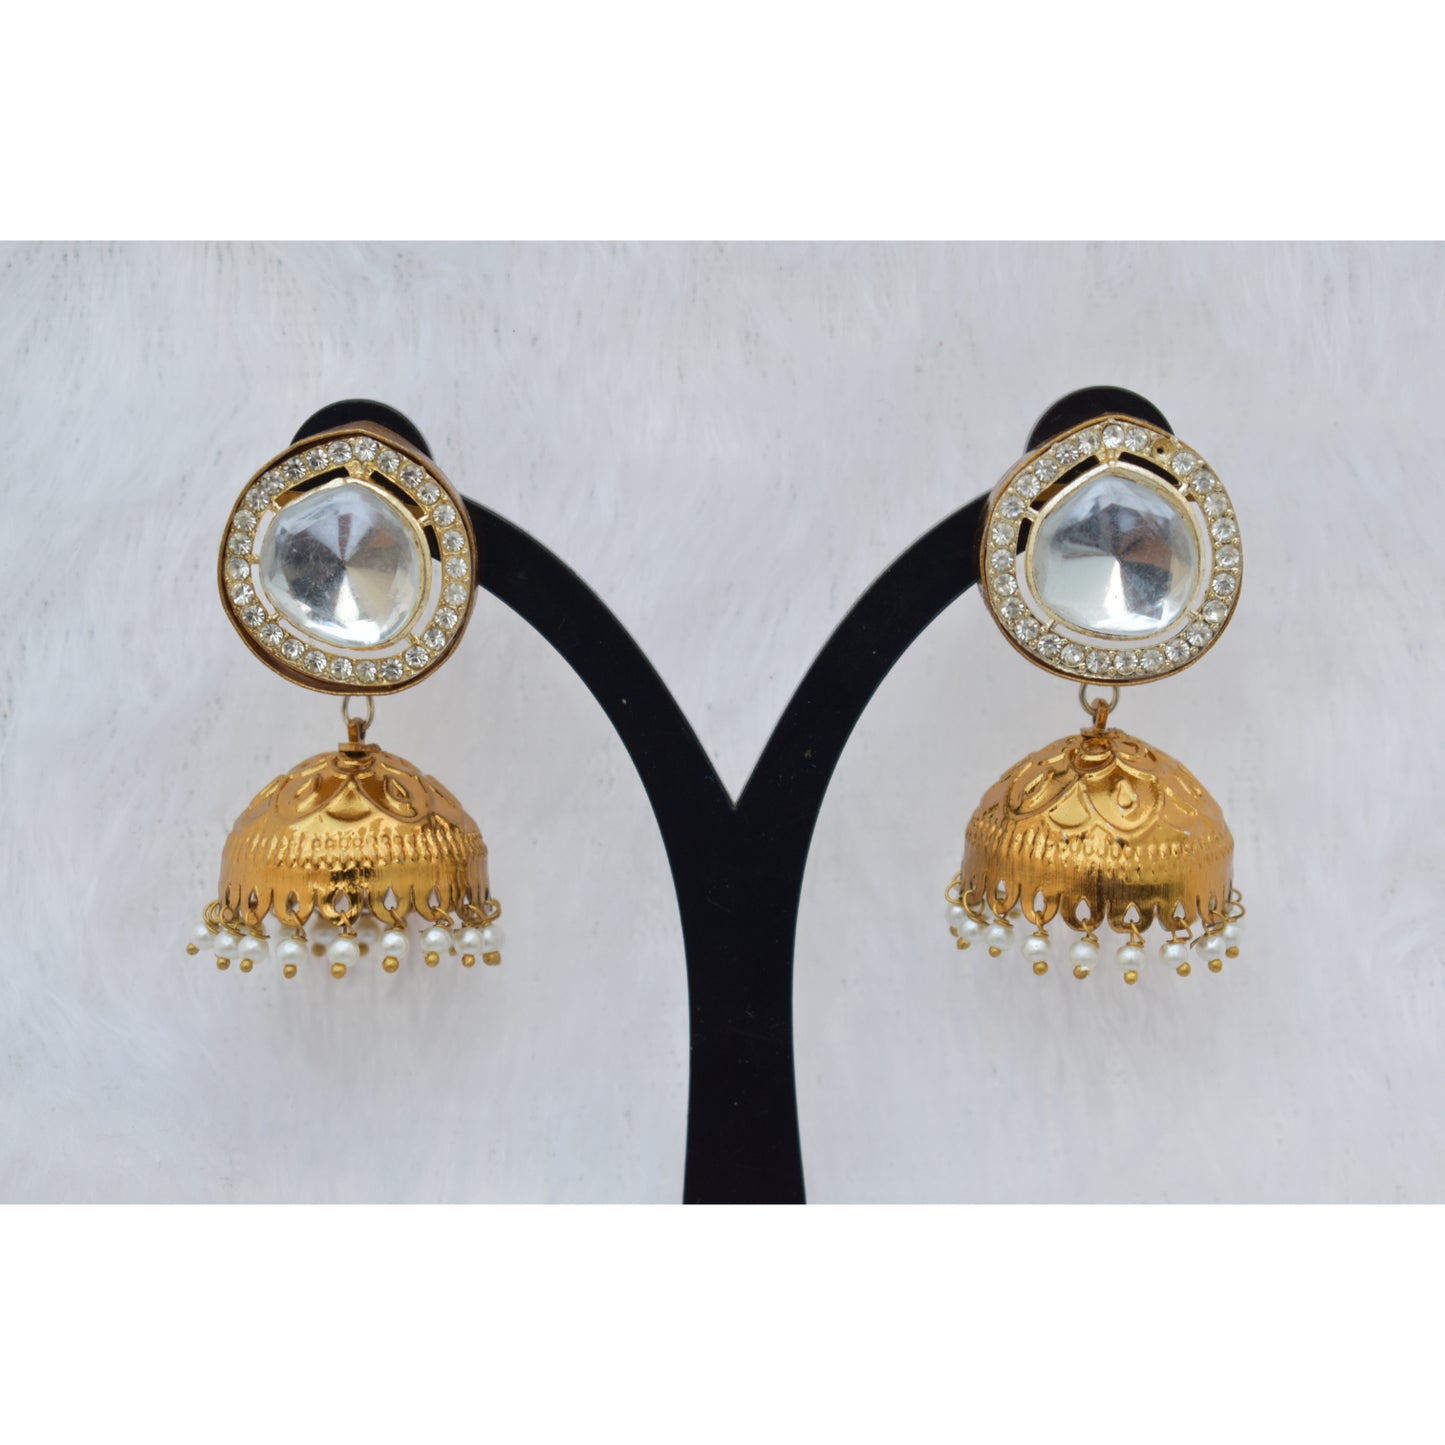 A pair of goldplated antique finish jhumka earing